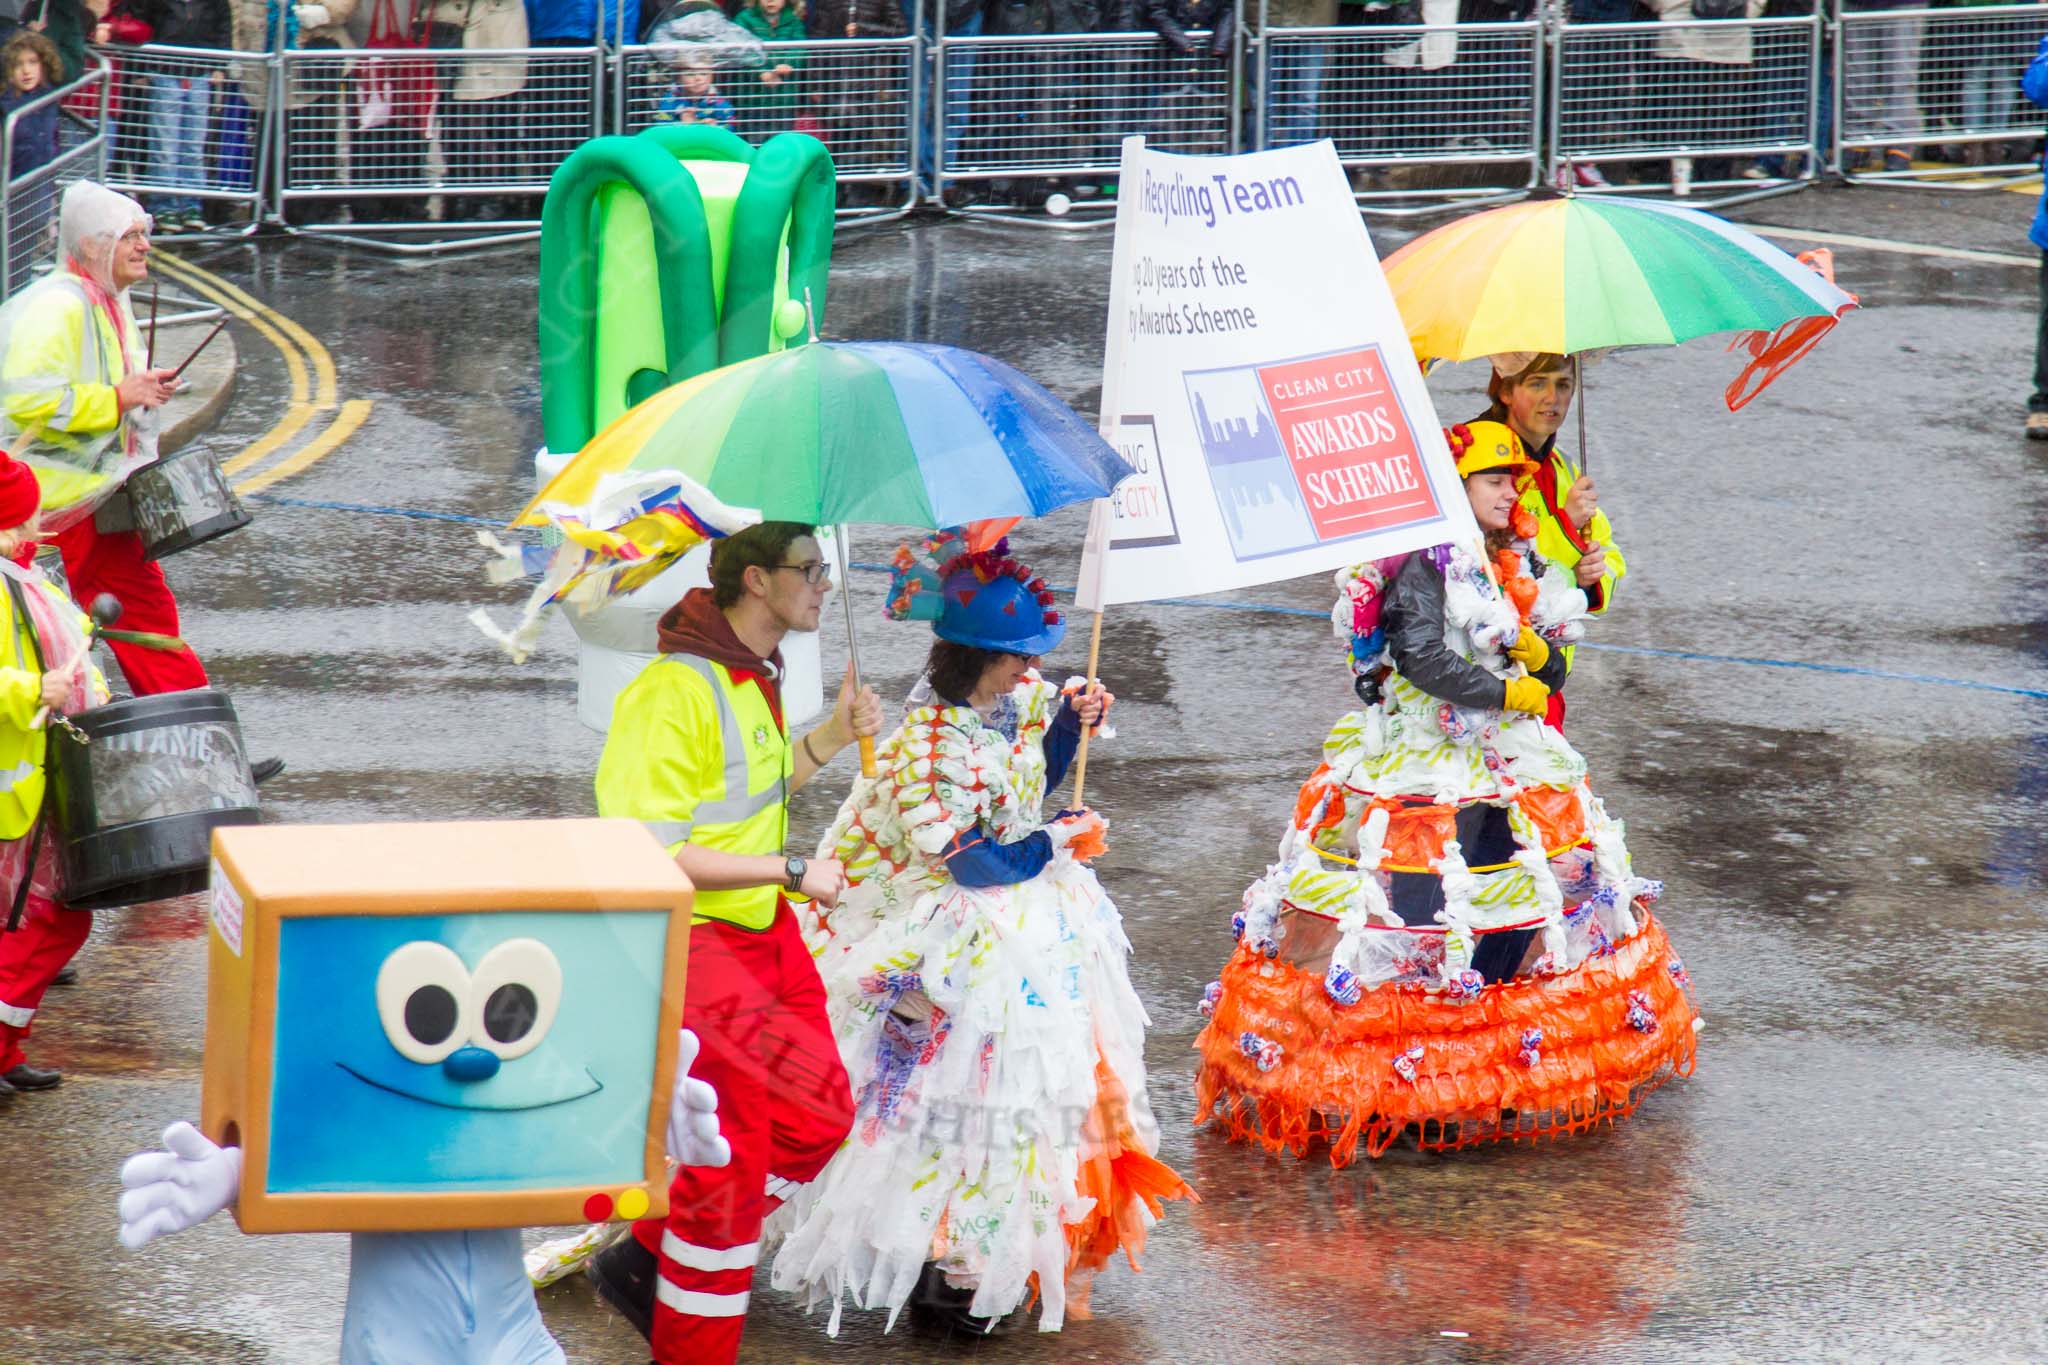 Lord Mayor's Show 2013: 59-Recycling in the City- The Binbot is joined again by his drumming street sweepers to celebrate 20th anniversary of the City's unique Clean City Awards scheme..
Press stand opposite Mansion House, City of London,
London,
Greater London,
United Kingdom,
on 09 November 2013 at 11:31, image #733